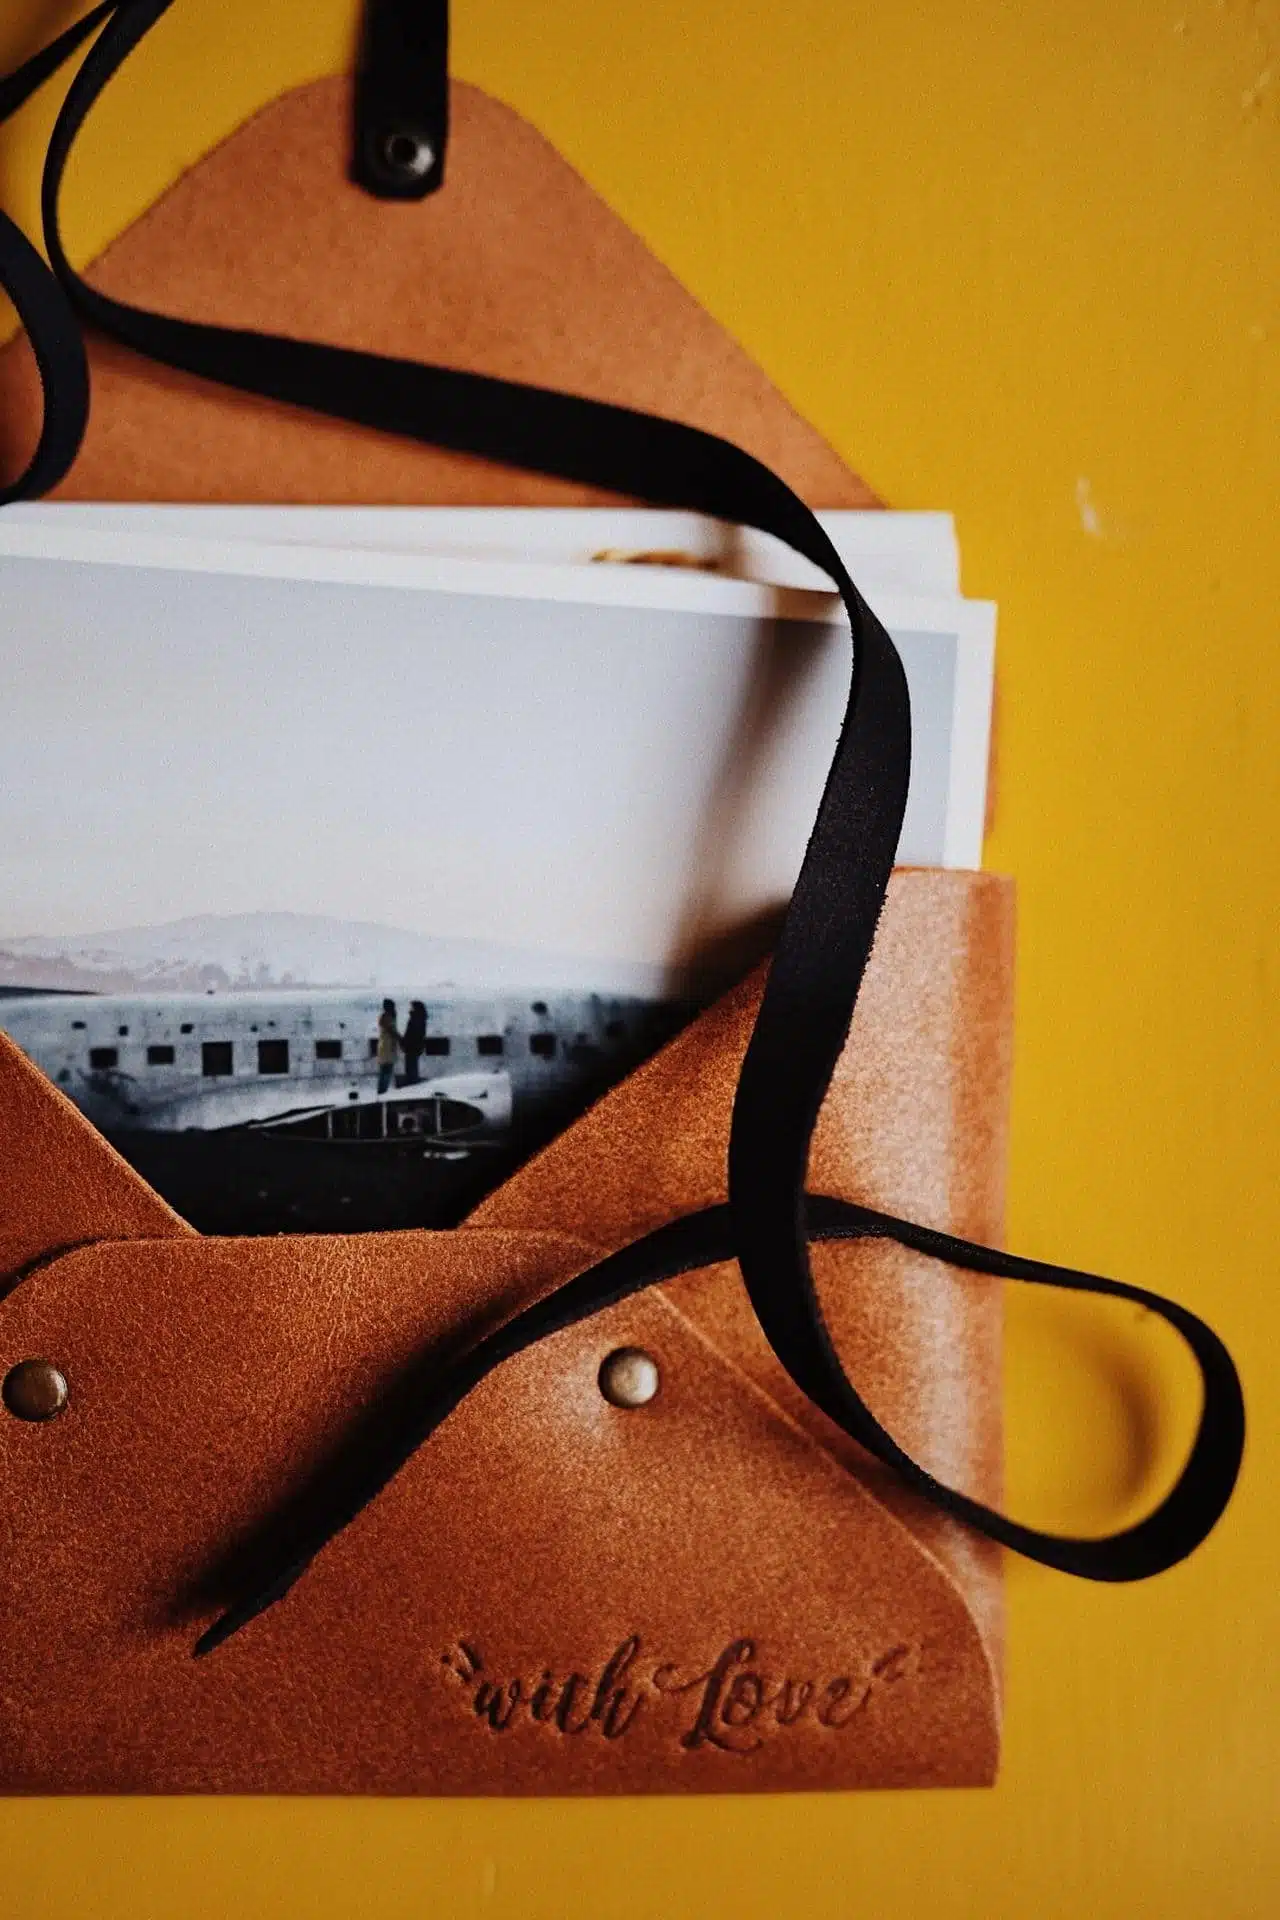 Wild Leather | button closing | size M | 13x19cm | 5×7″ | real leather envelope for prints | handmade photography pouch